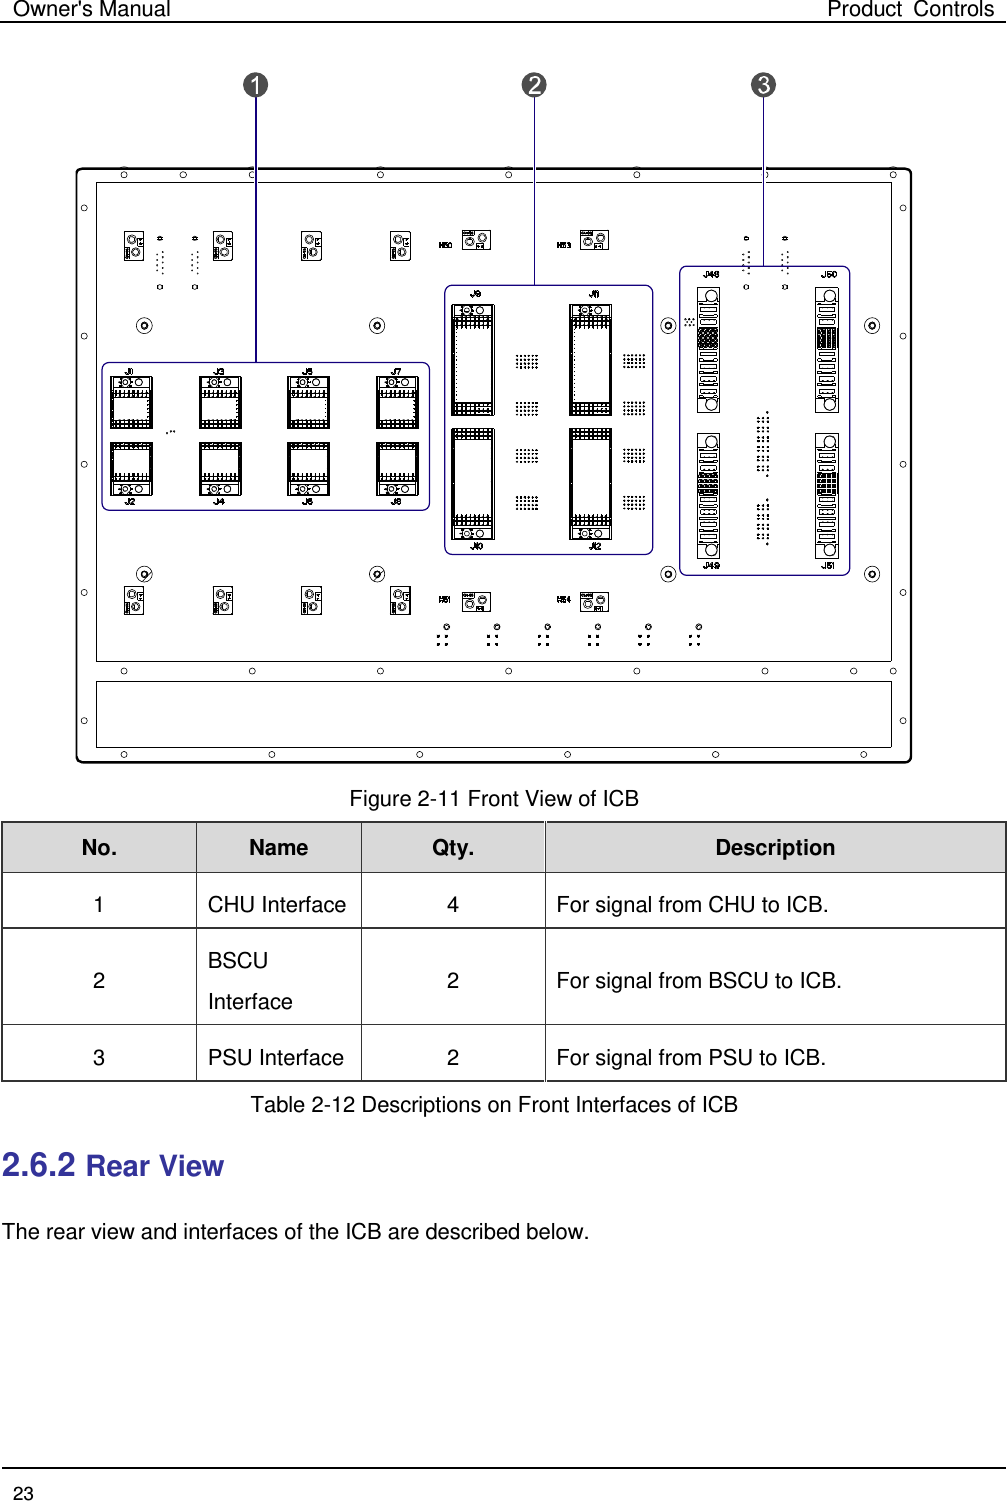 Owner&apos;s Manual Product Controls  23   Figure 2-11 Front View of ICB No. Name   Qty. Description   1  CHU Interface  4  For signal from CHU to ICB. 2  BSCU Interface 2  For signal from BSCU to ICB. 3  PSU Interface  2  For signal from PSU to ICB. Table 2-12 Descriptions on Front Interfaces of ICB 2.6.2 Rear View The rear view and interfaces of the ICB are described below. 